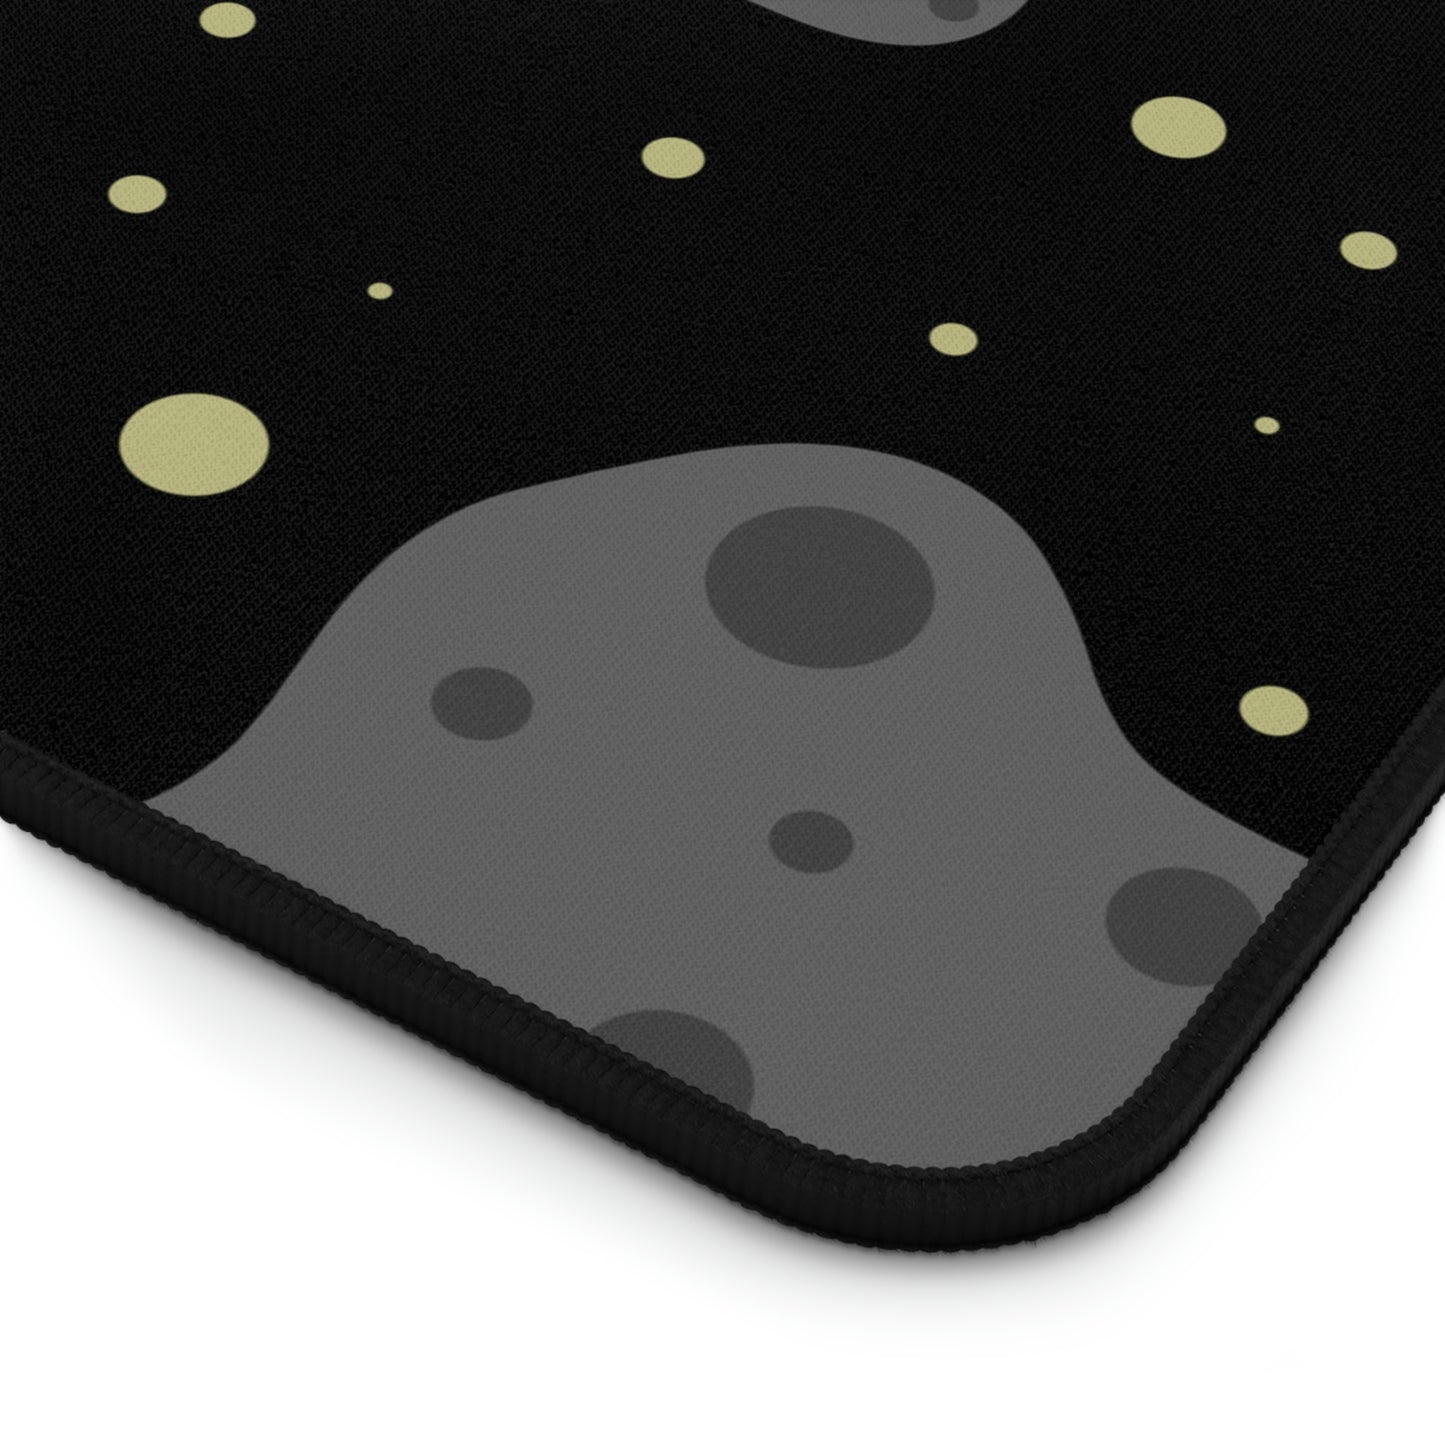 The corner of a 12" x 18" desk mat with a black background, gray asteroids, and yellow stars.